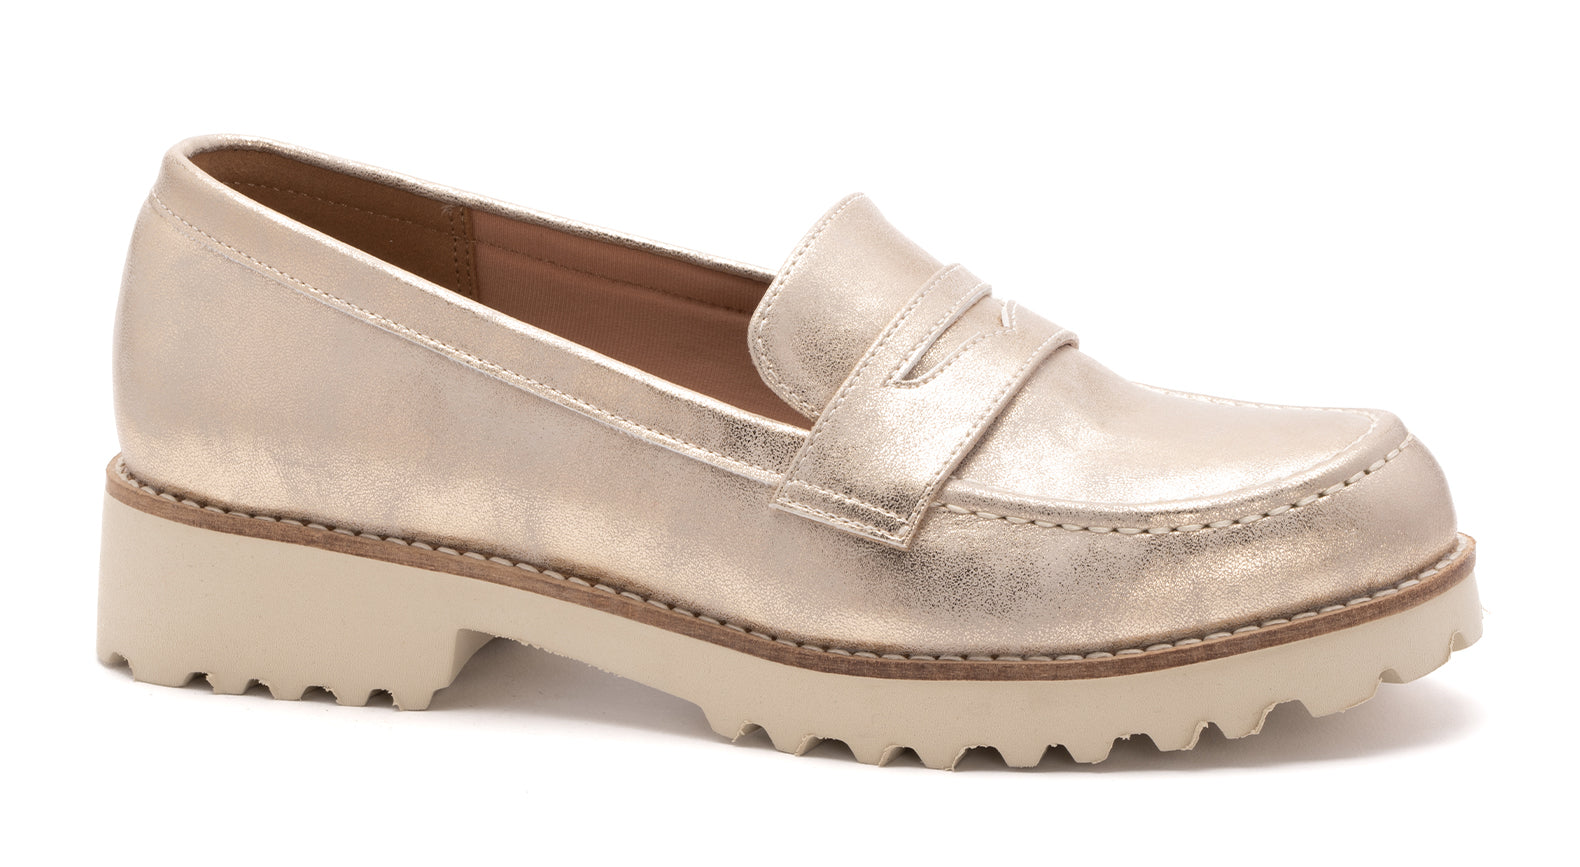 CORKYS Boost Penny Loafers - Gold Metallic